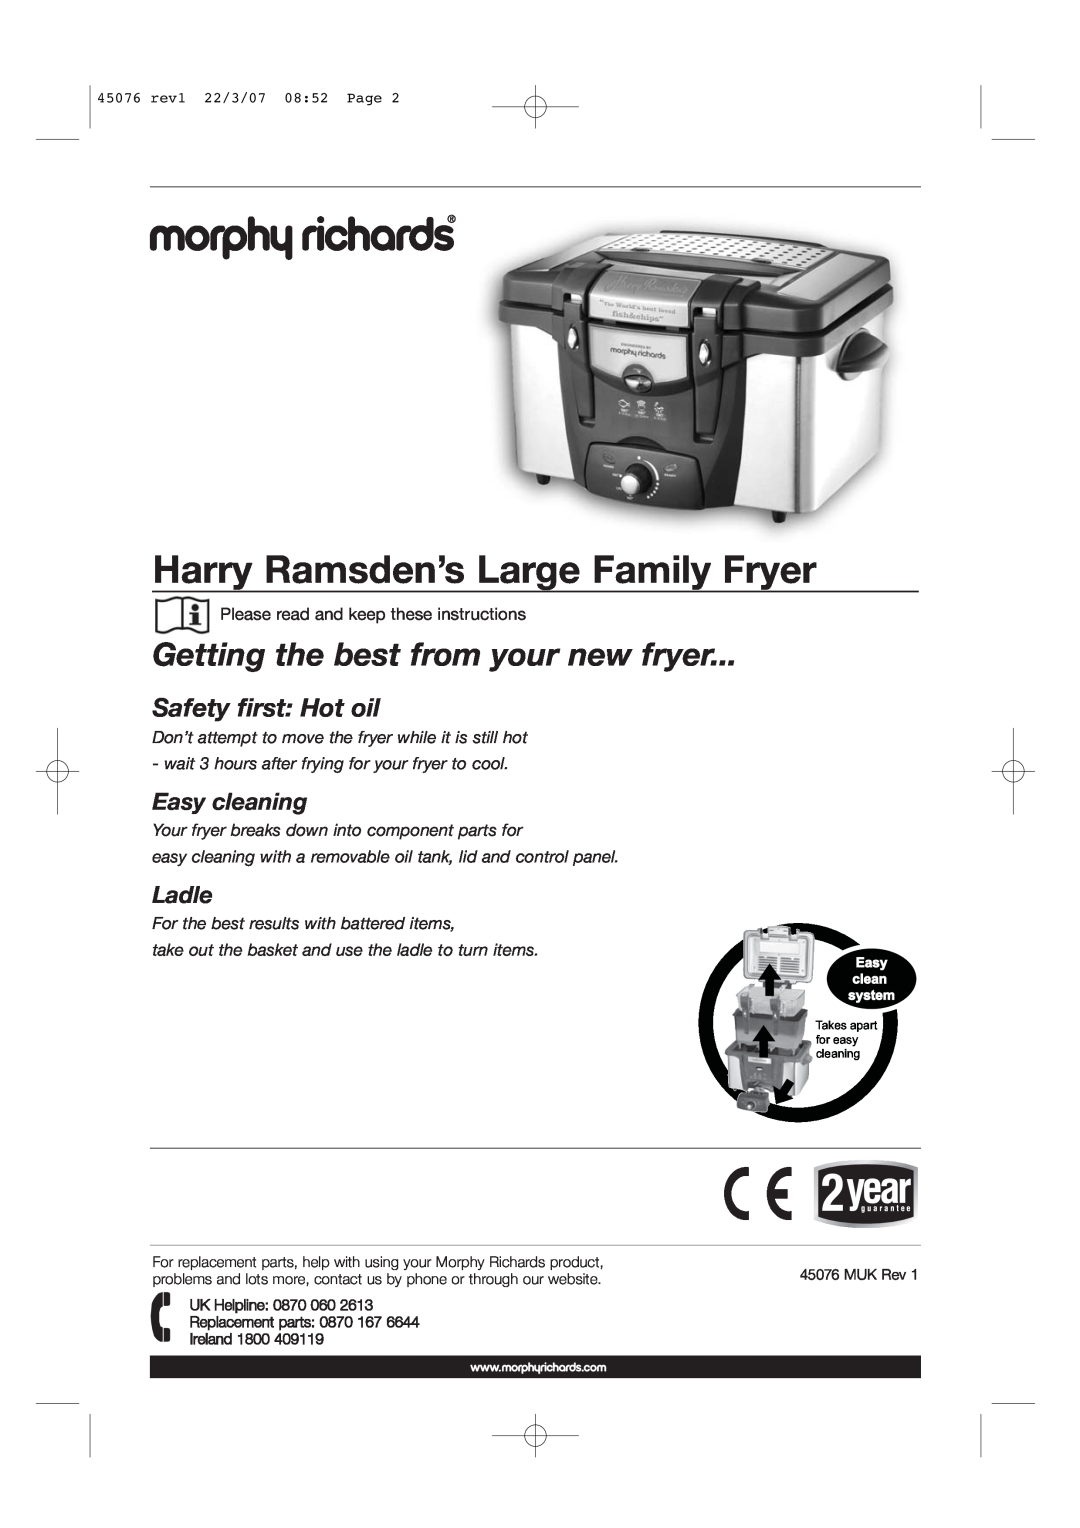 Morphy Richards Coffeemaker Easy cleaning, Ladle, Harry Ramsden’s Large Family Fryer, Getting the best from your new fryer 